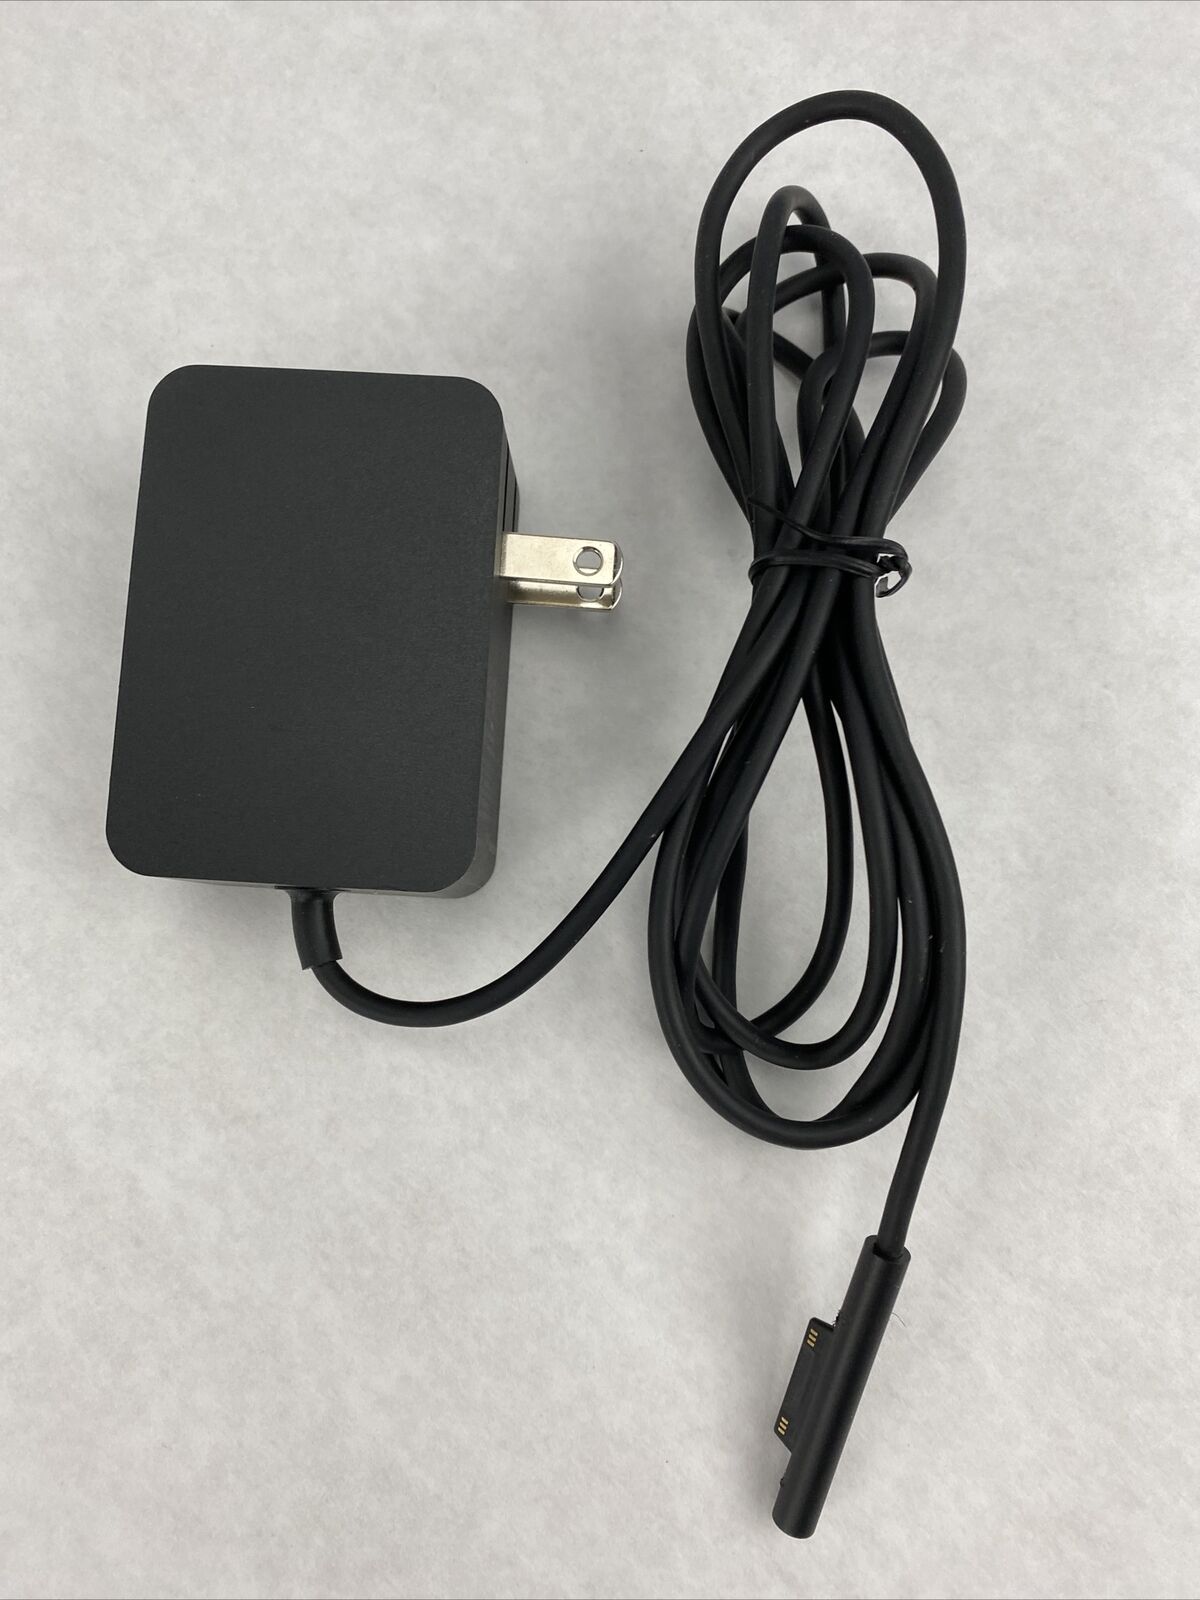 Microsoft 1735 Surface Pro 3 4 5 6 Genuine AC Adapter 15V 1.6A Charger 24W